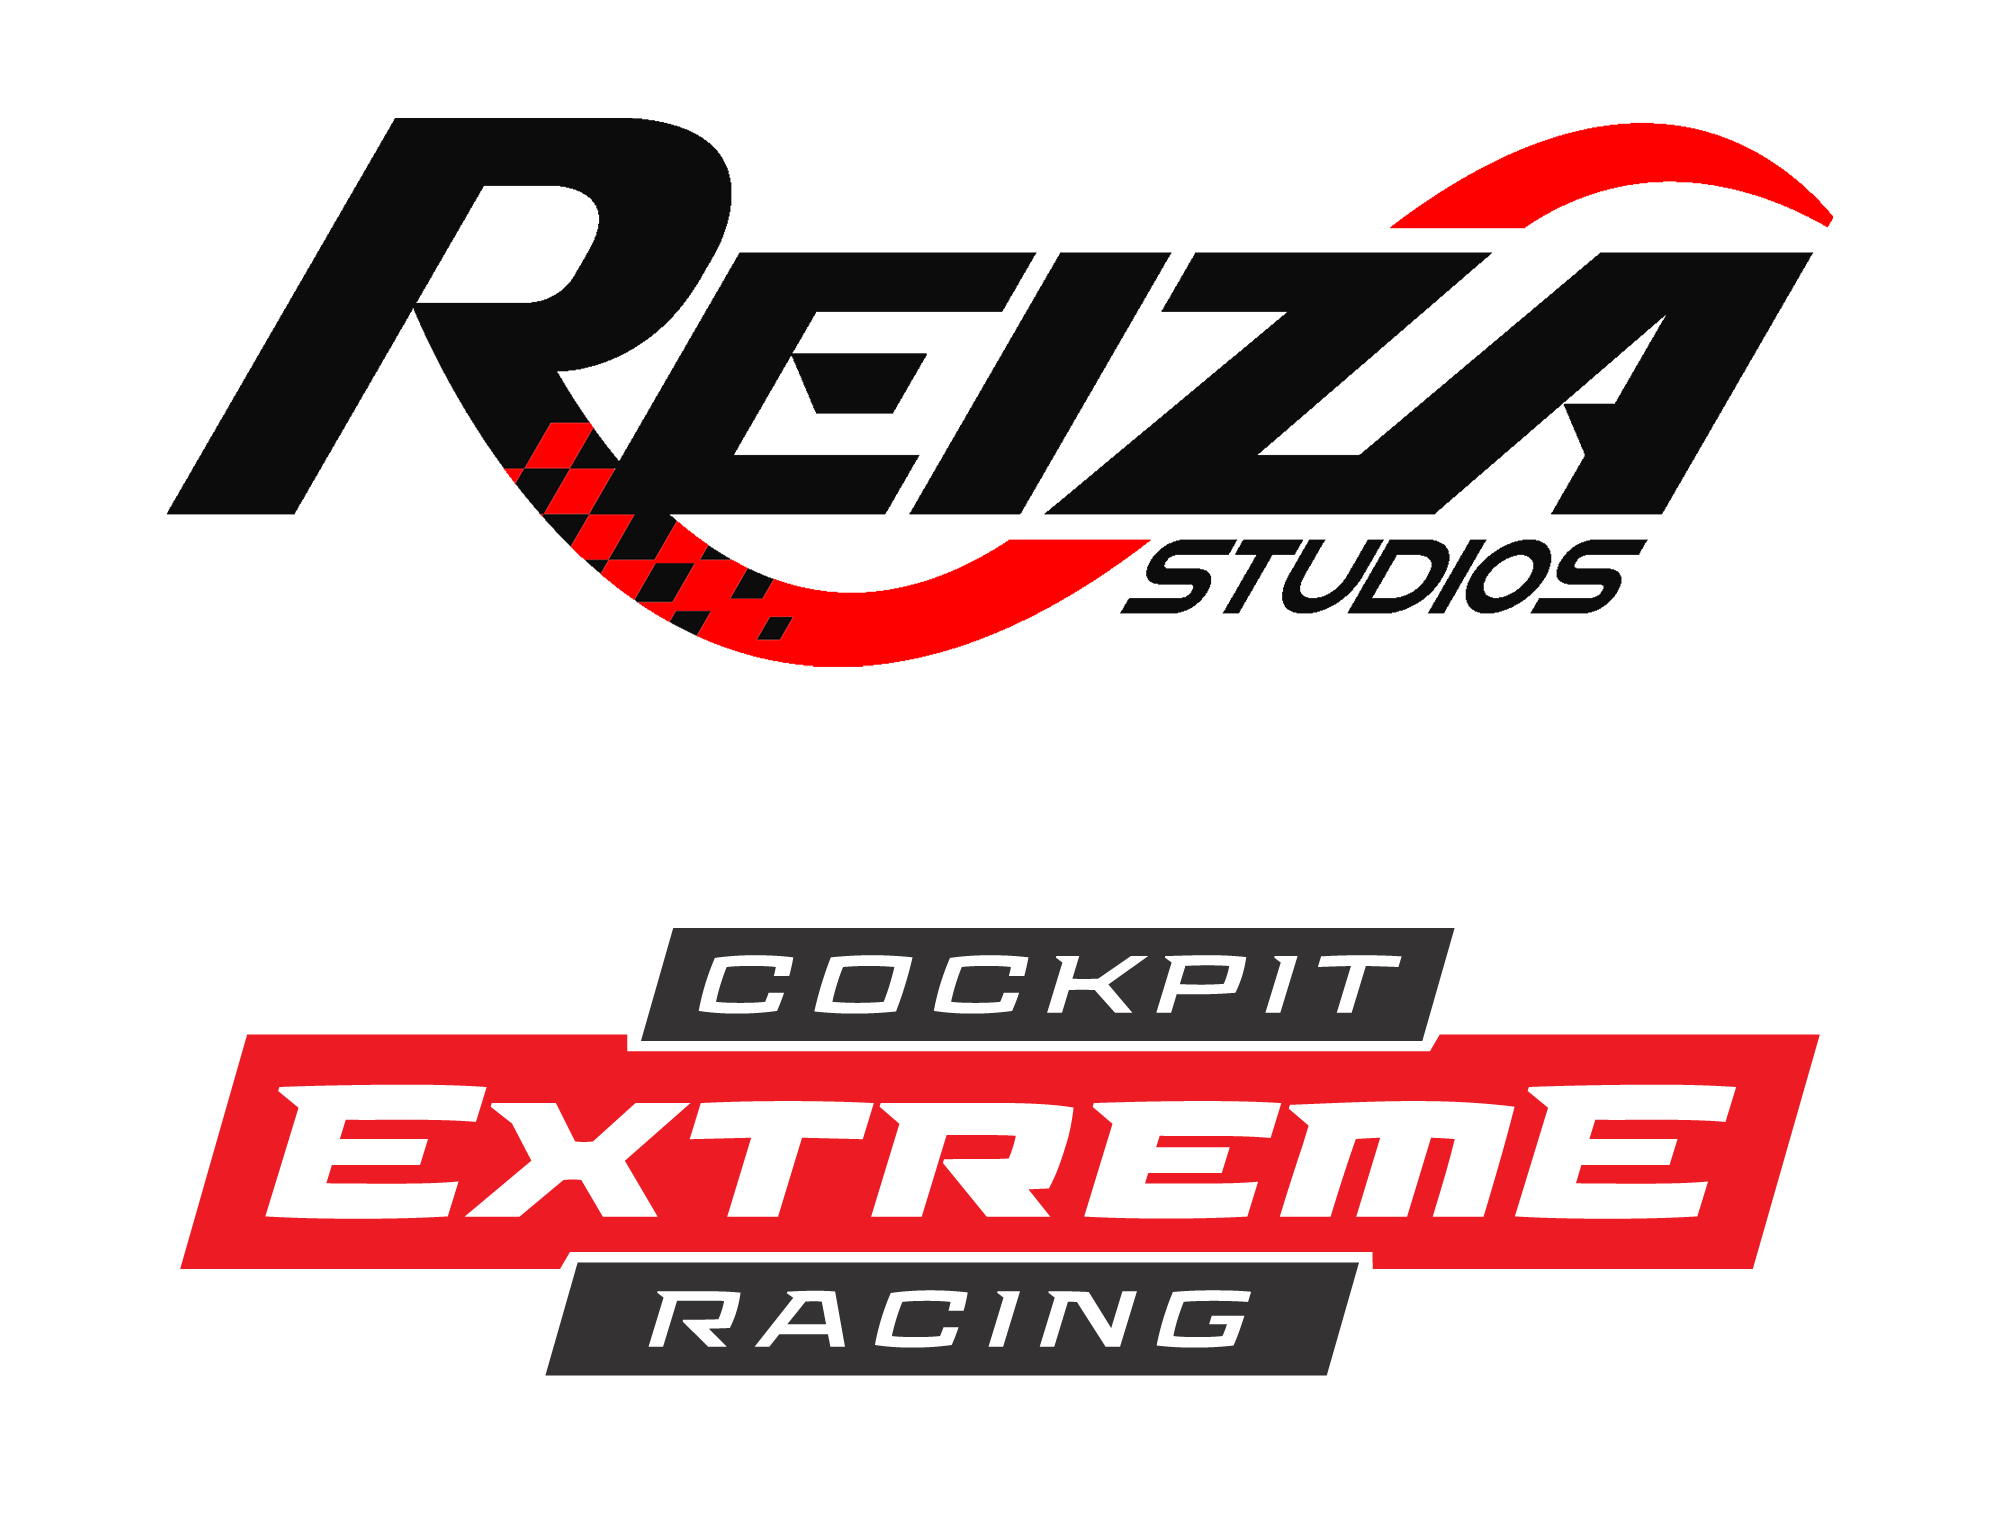 Racing Game Logo - Game Stock Car Extreme - Formula Vee Painting Contest - Inside Sim ...